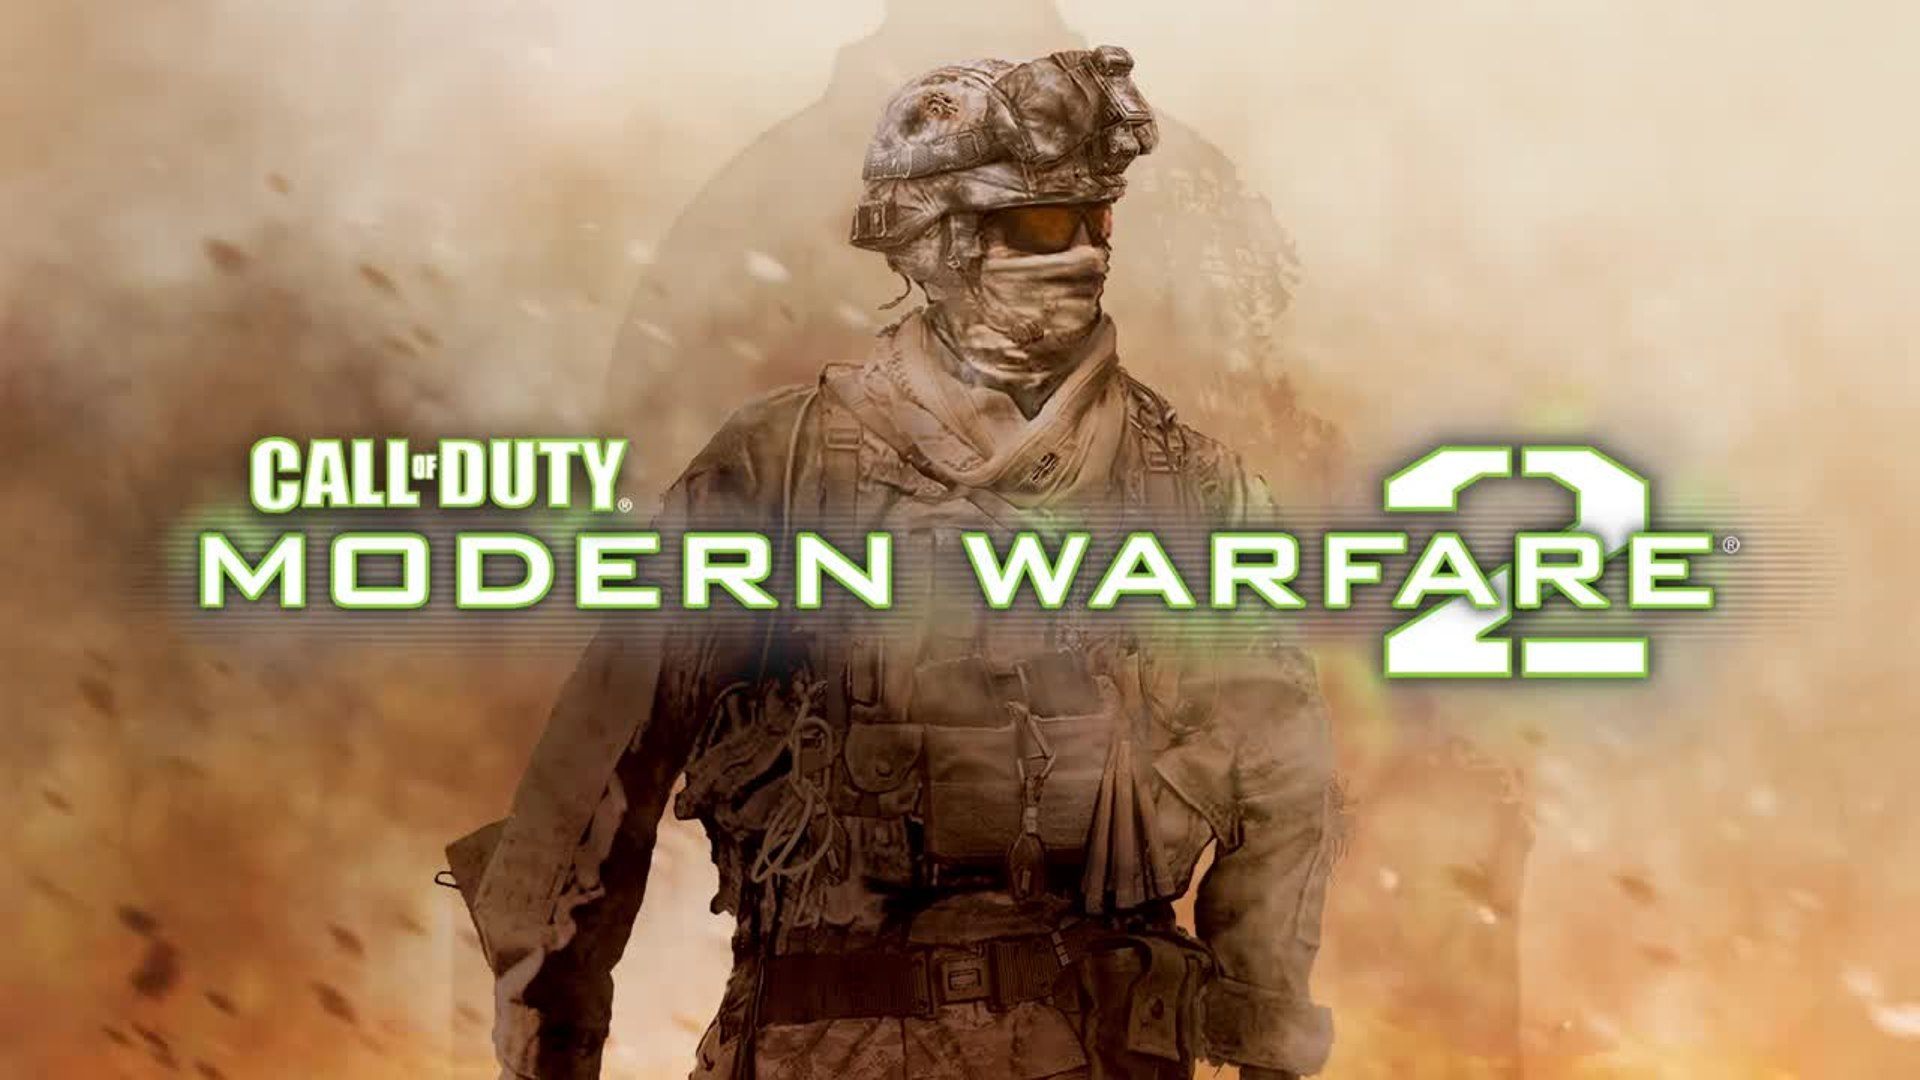 modern-warfare-ii-may-be-the-title-of-call-of-duty-2022-confusingly-pcgamesn